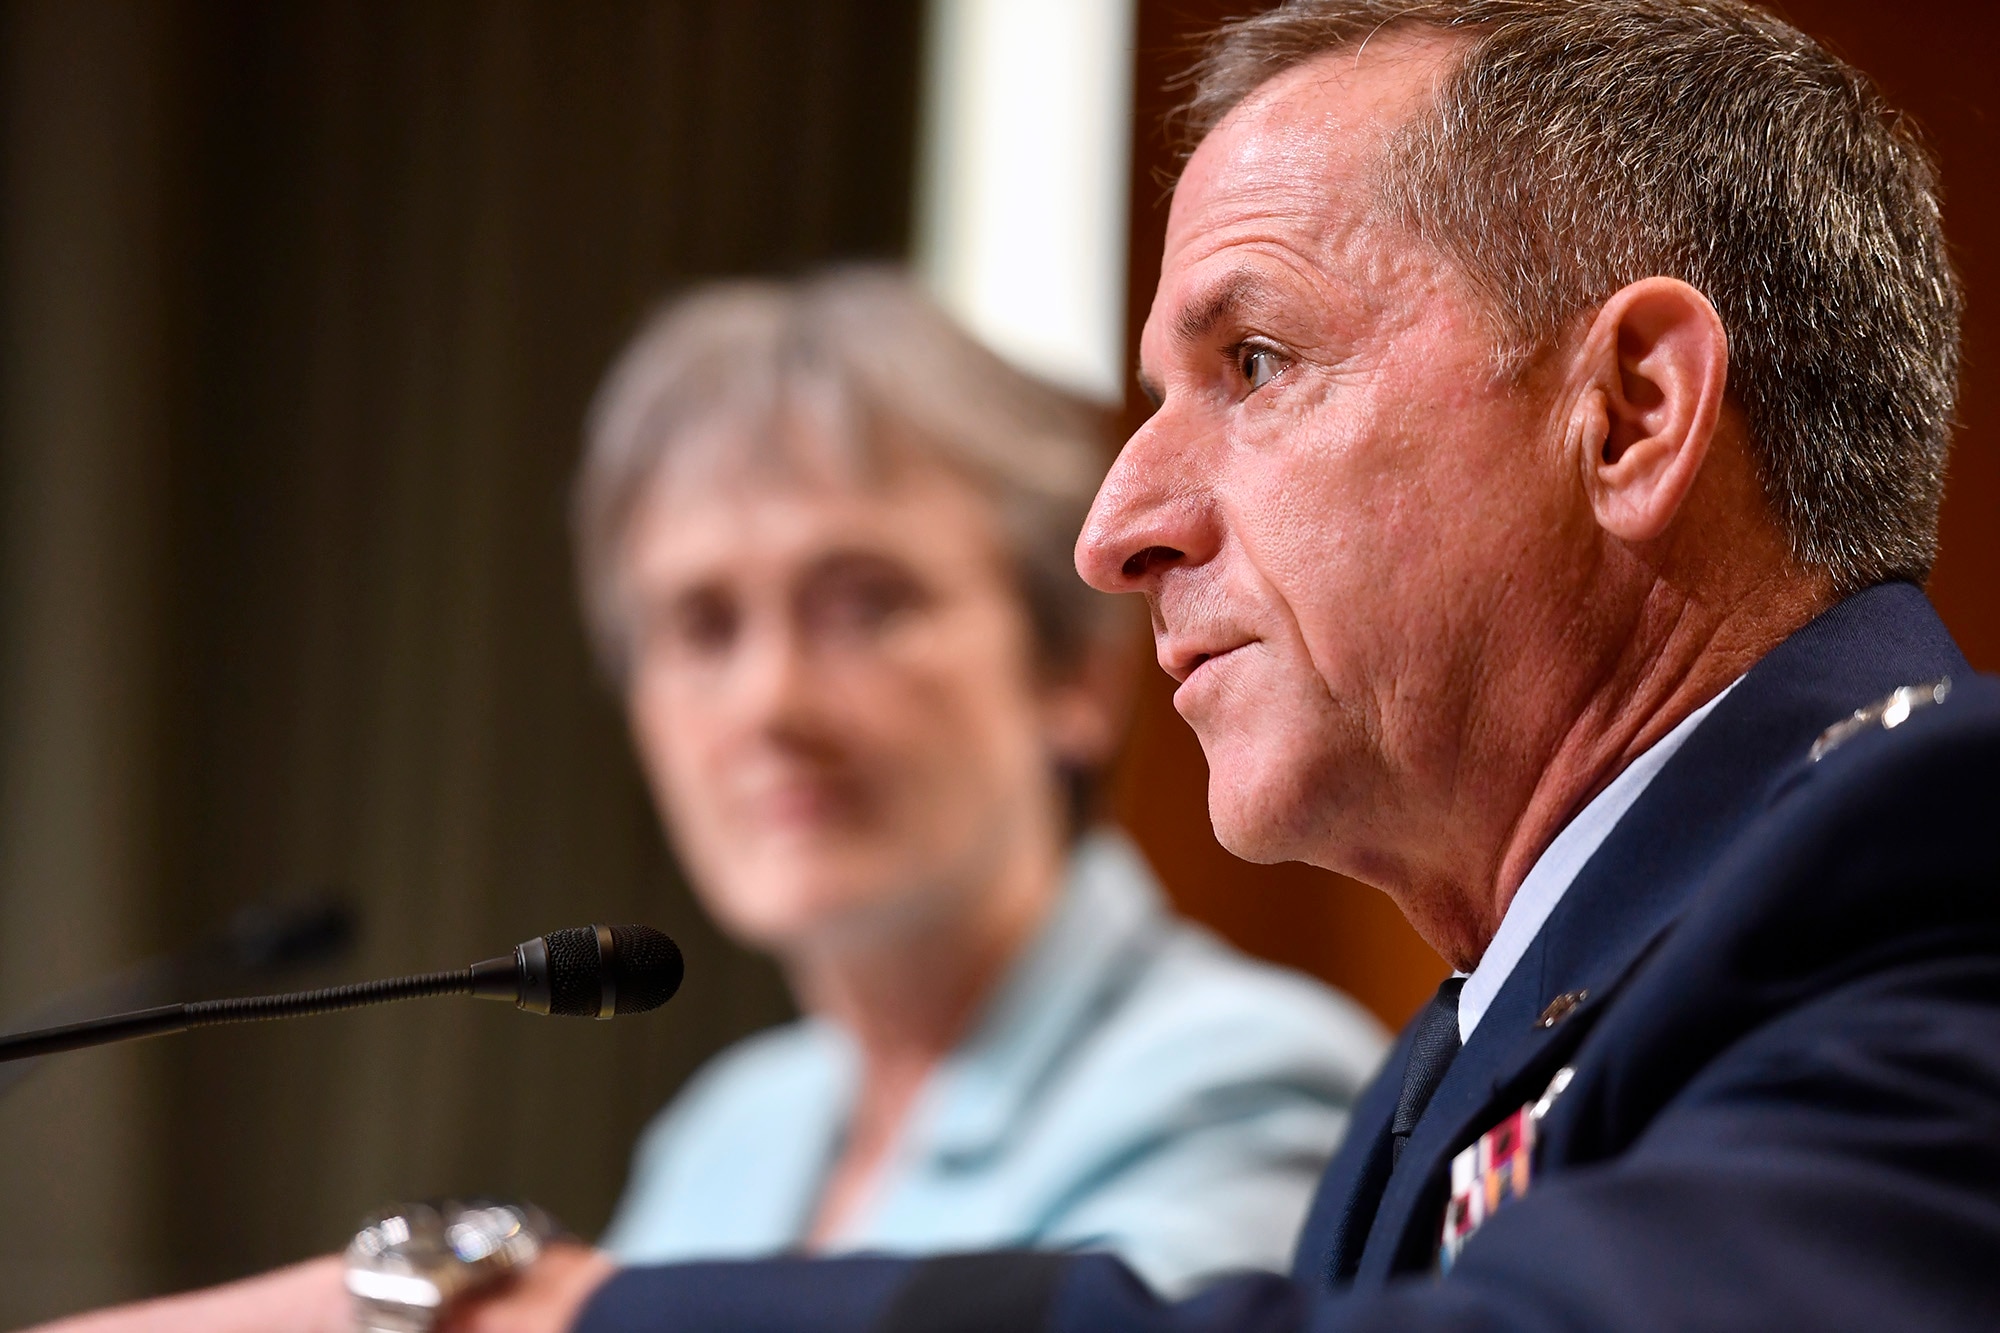 Air Force Chief of Staff Gen. David Goldfein testifies before the Senate Appropriations Committee for Defense June 21, 2017, in Washington, D.C. Secretary of the Air Force Heather Wilson joined Goldfein before the subcommittee's hearing to discuss the fiscal year 2018 budget request for the Air Force.  (U.S. Air Force photo/Scott M. Ash)